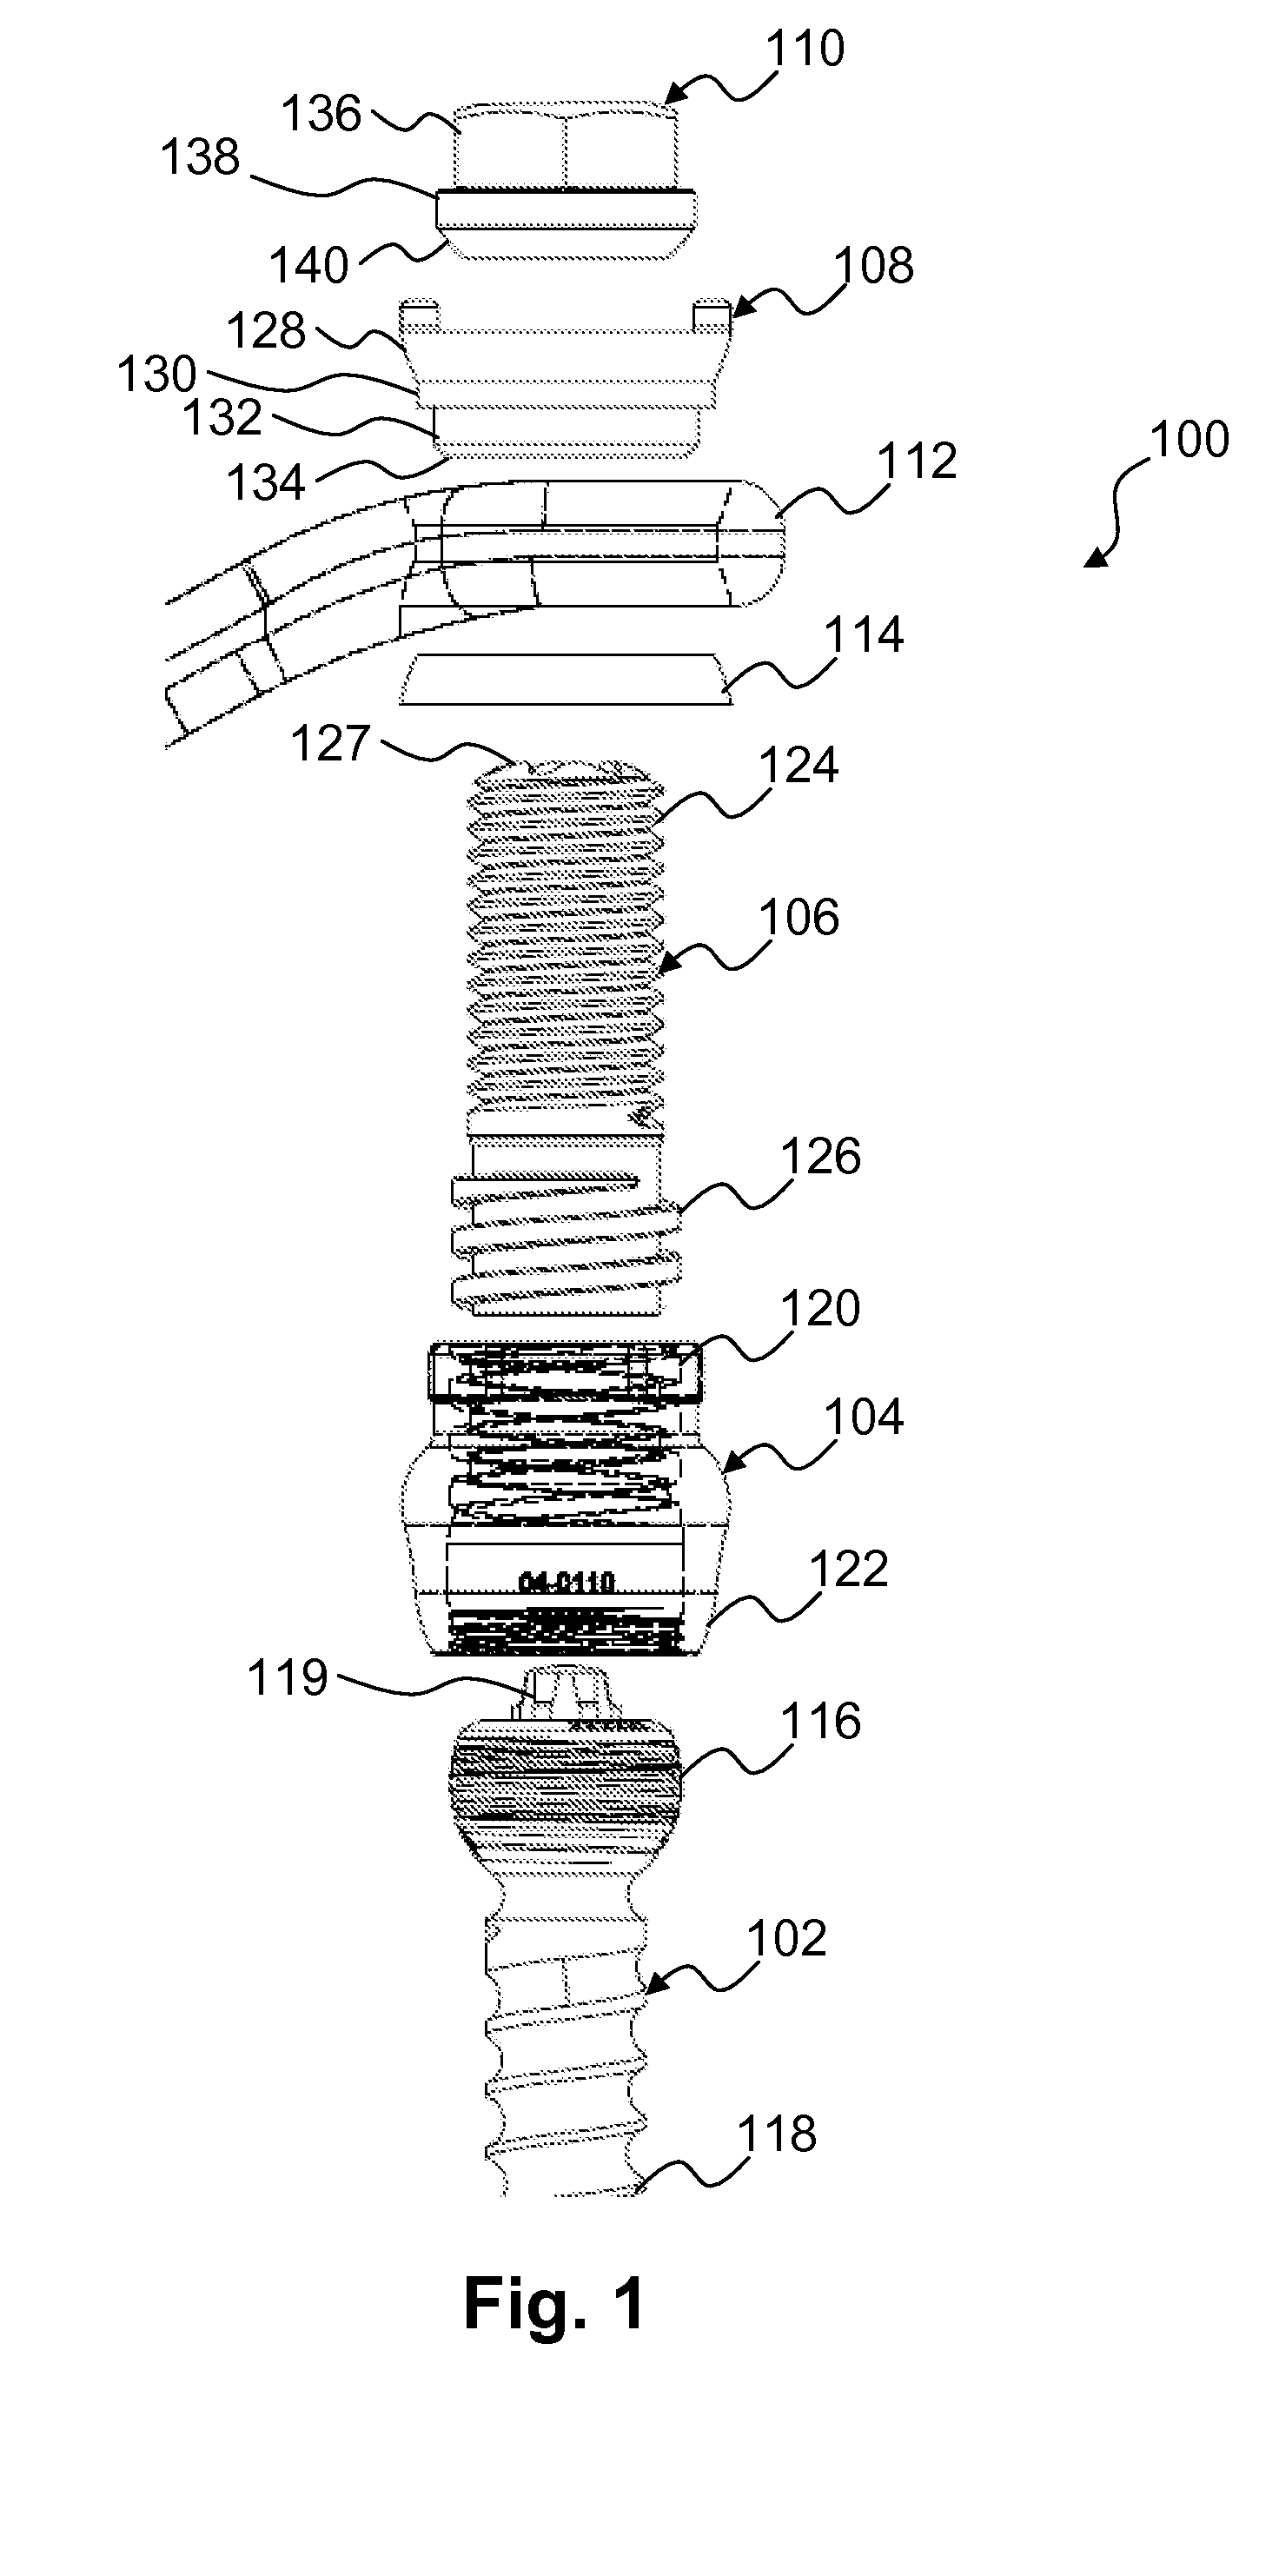 System and method for a spinal implant locking assembly